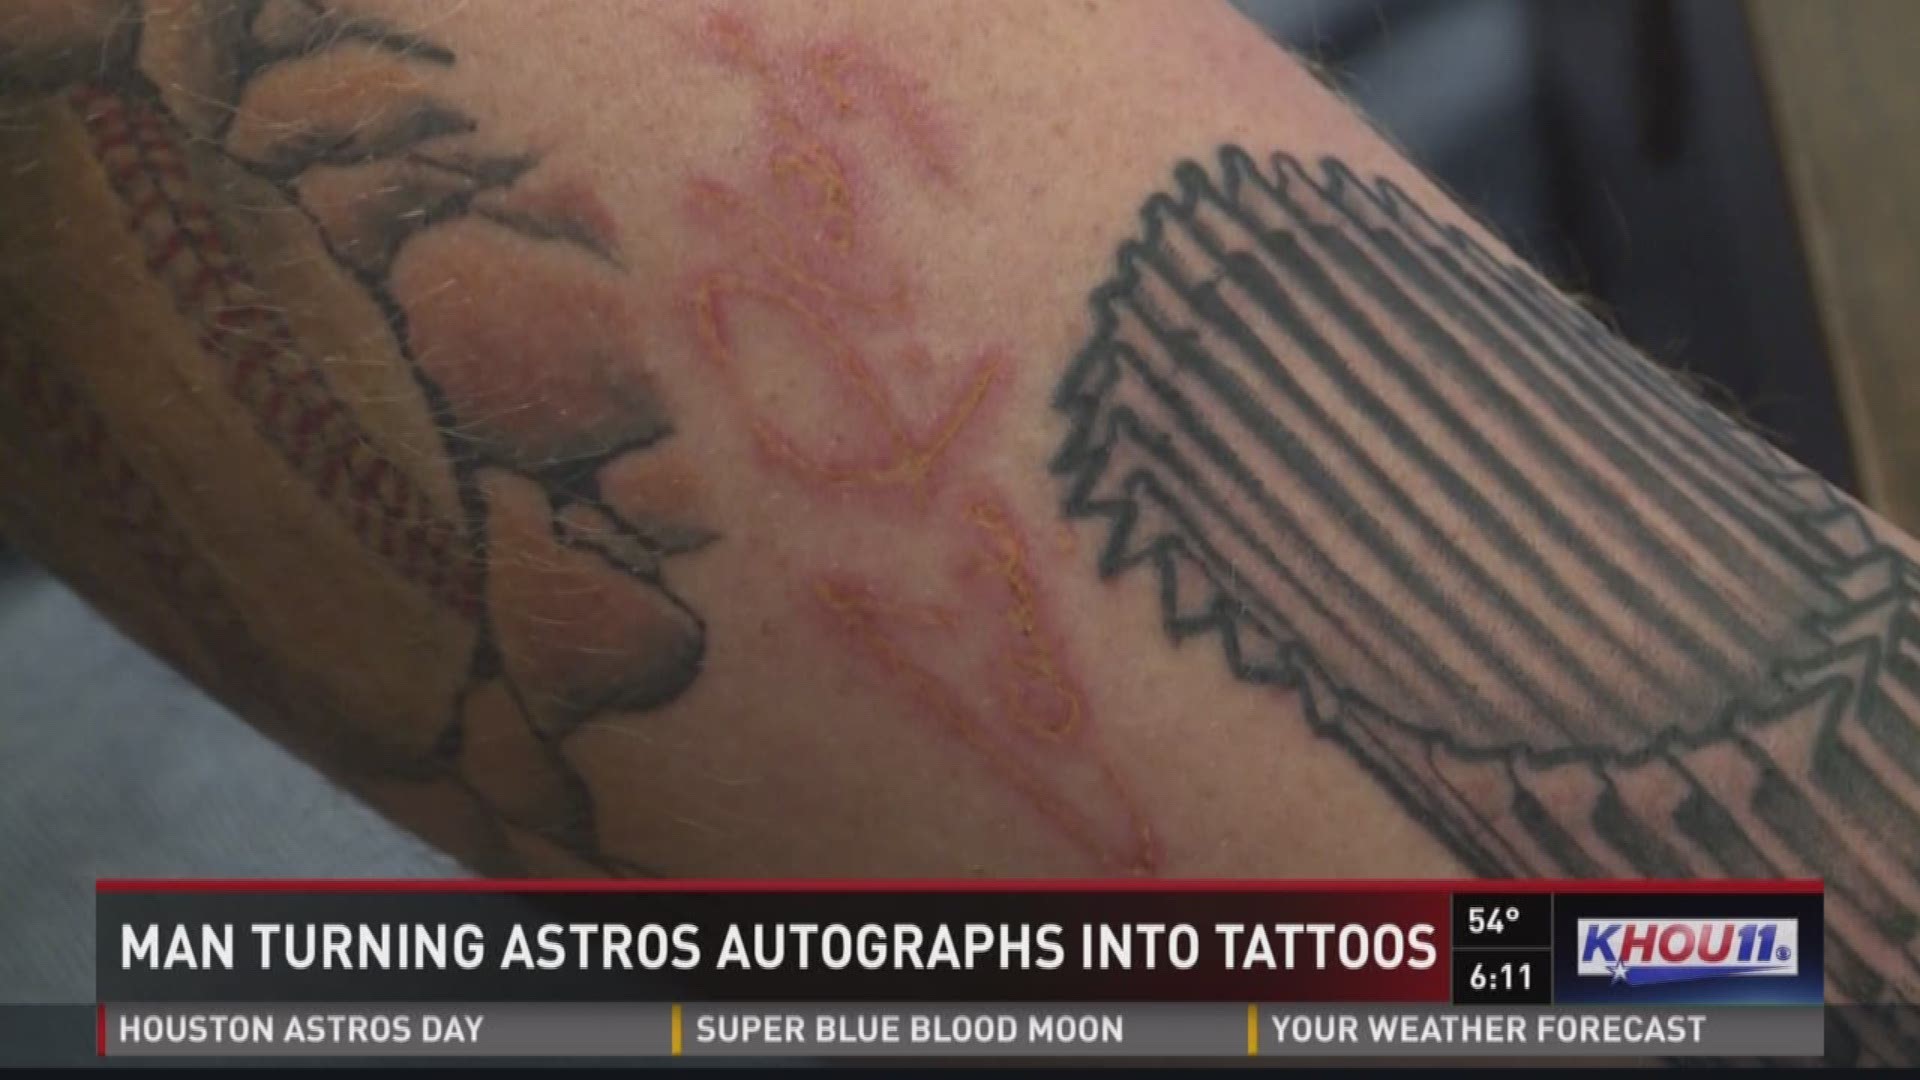 Manvel man tattoos Astros players' signatures on his arm